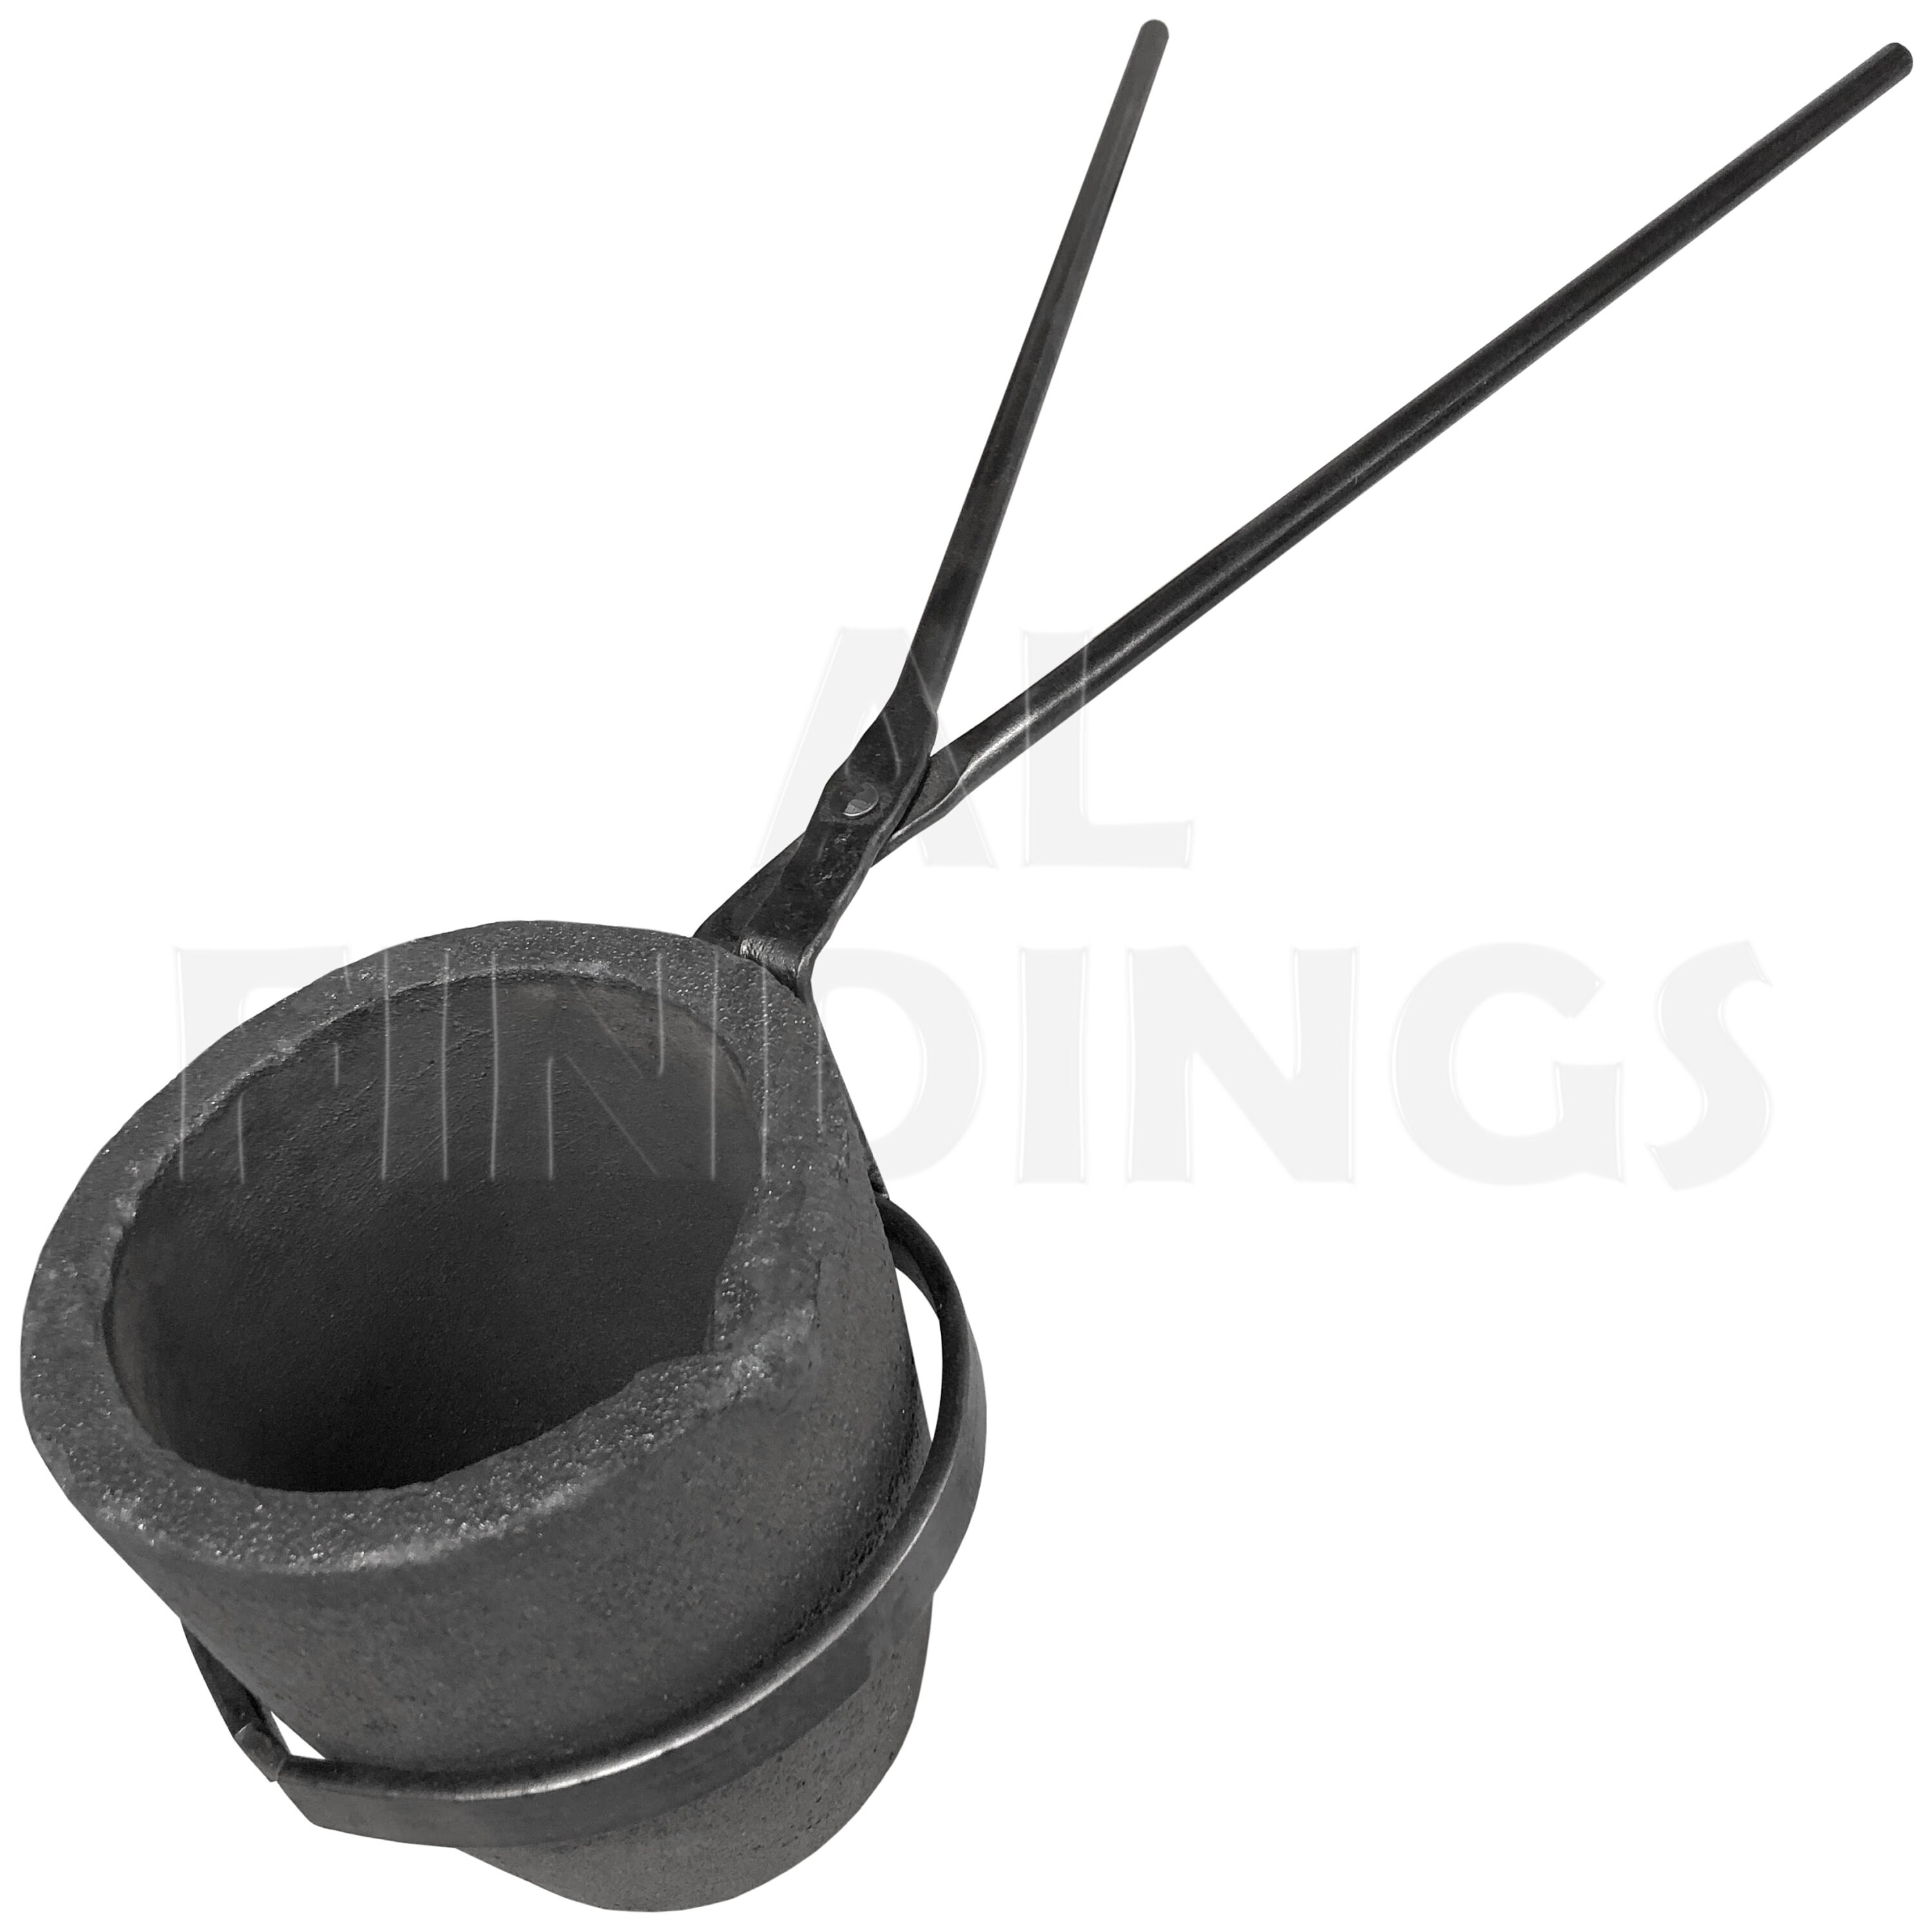 Crucible Tongs Holder Graphite Furnace Casting Foundry Tool Gas Melting  Furnace